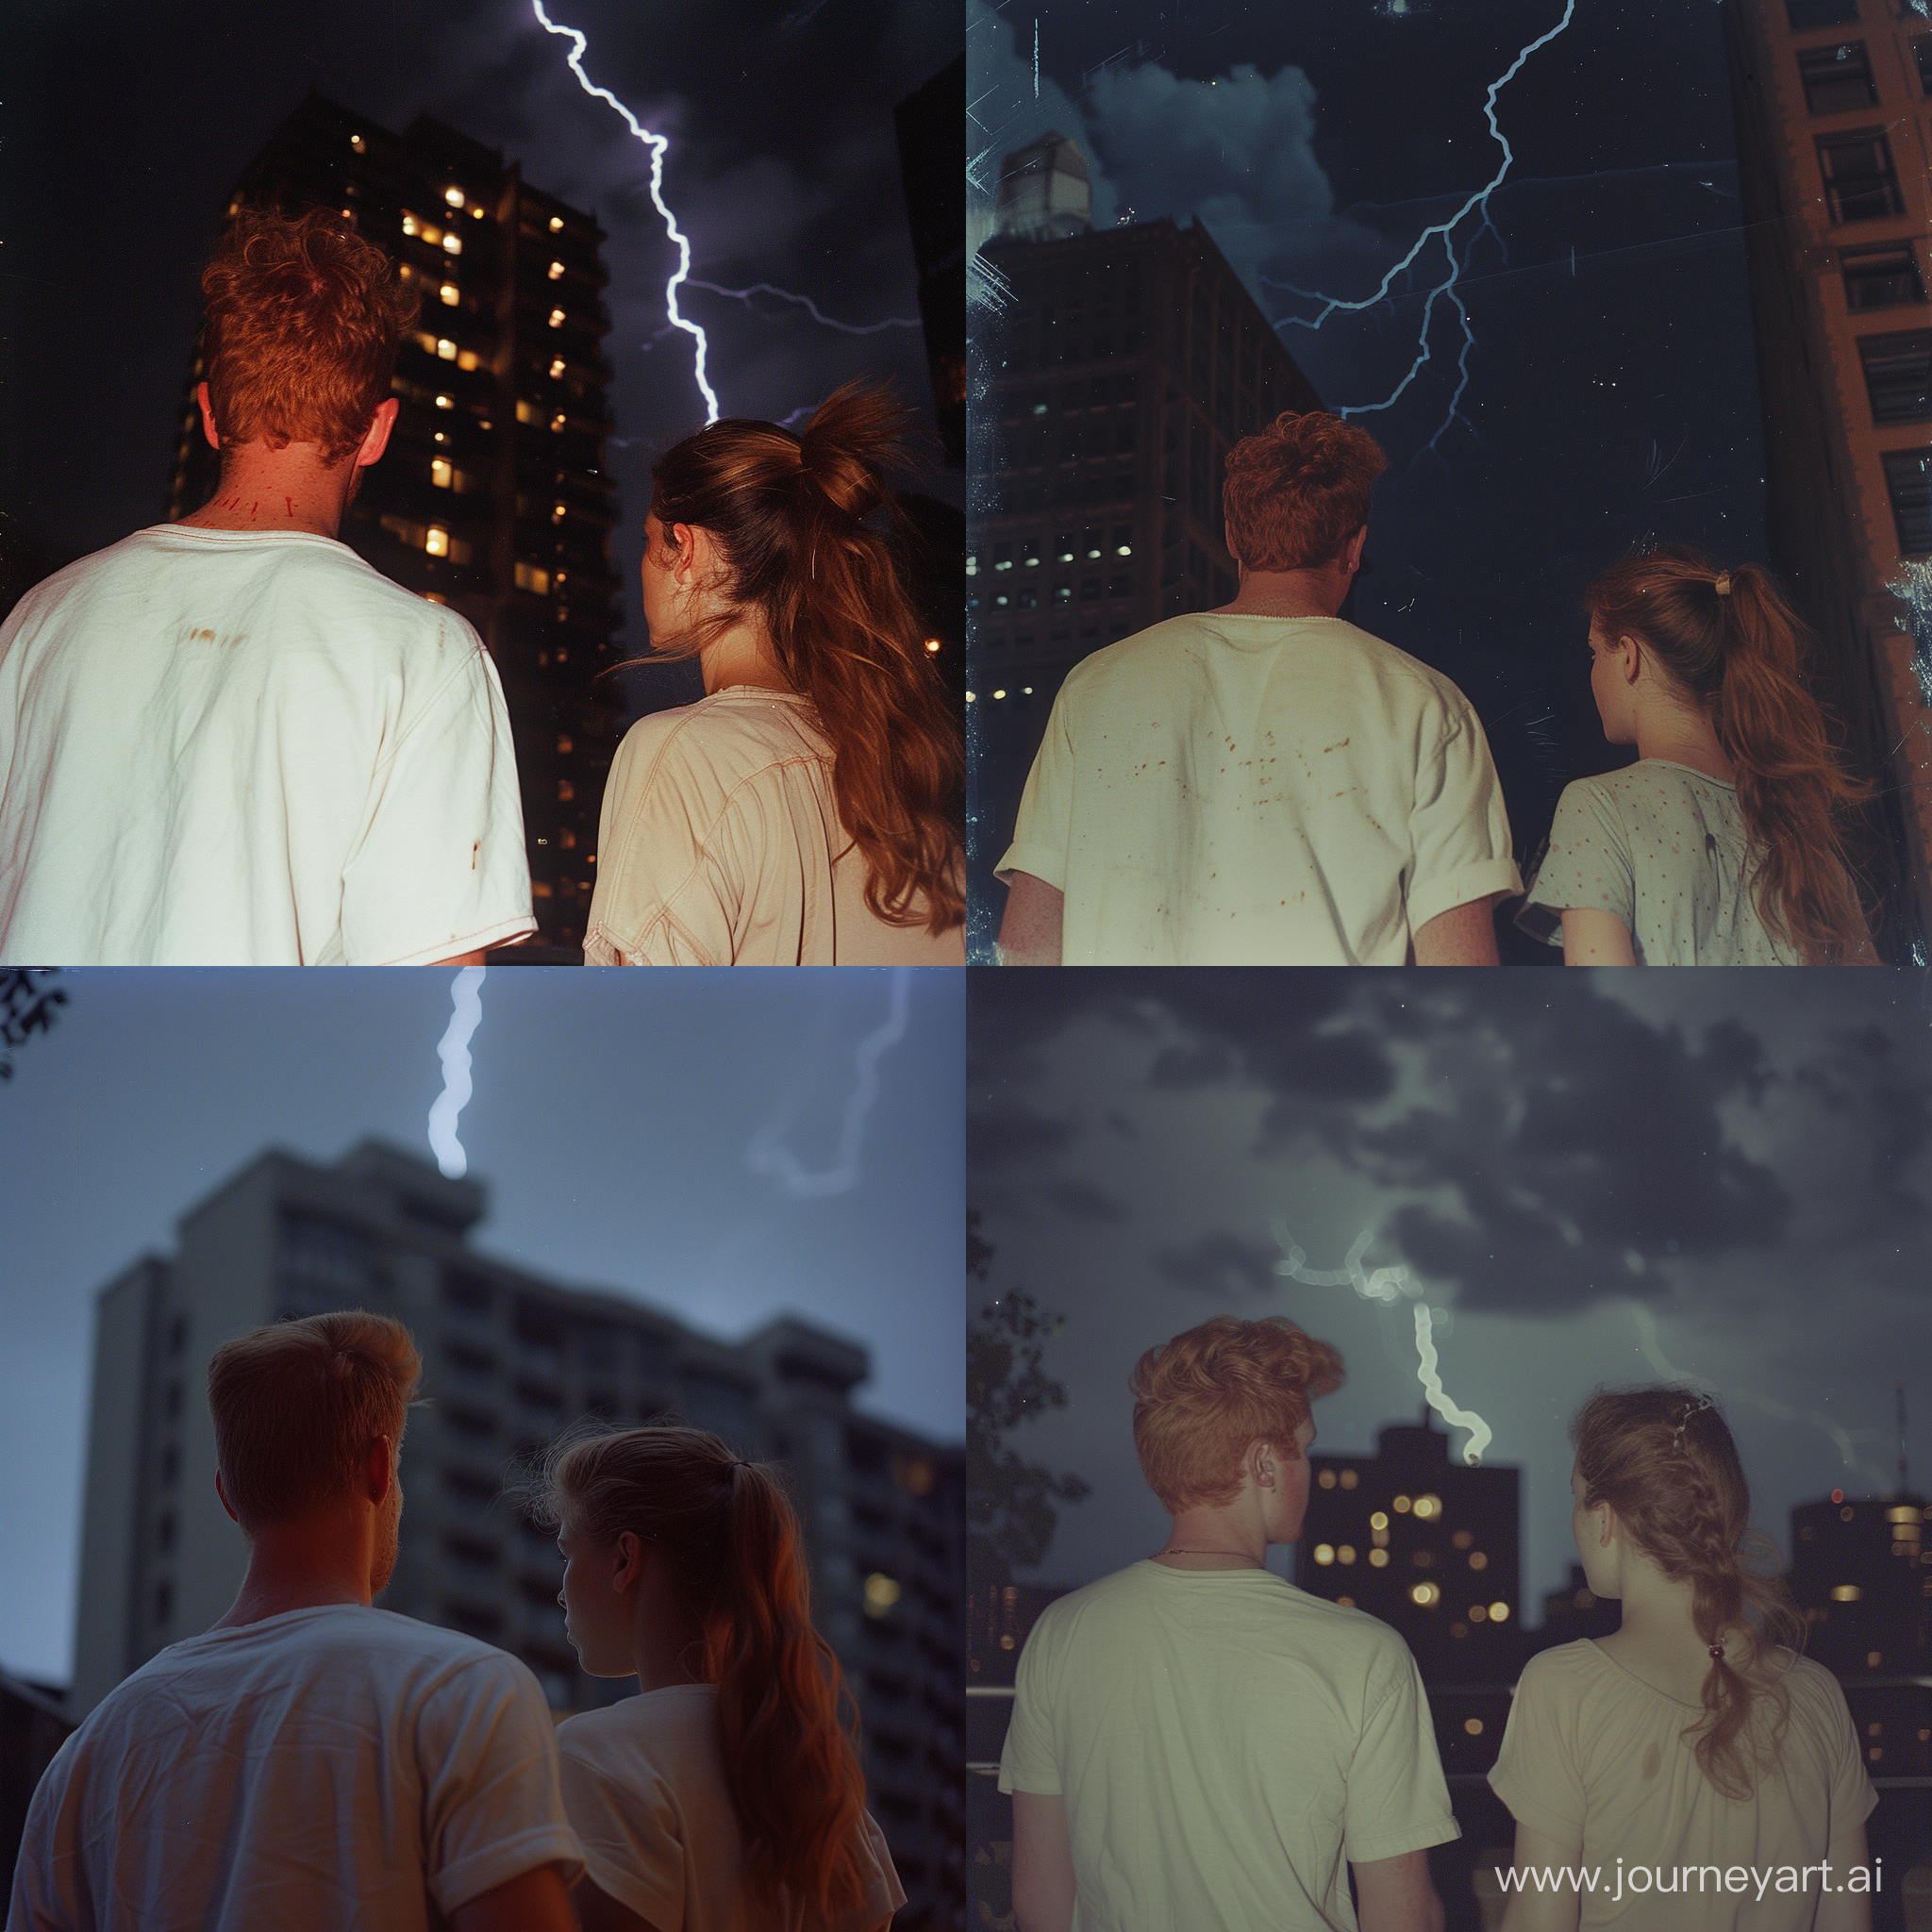 ultra-realitic photo, 16mm, grainy, night building urban scene, redhead man in cotton t-shirt and biege-hair girl, shot from the back. she looks at the sky. artifacts of film processing. old photo from 1997. drammatic lightning in the sky
